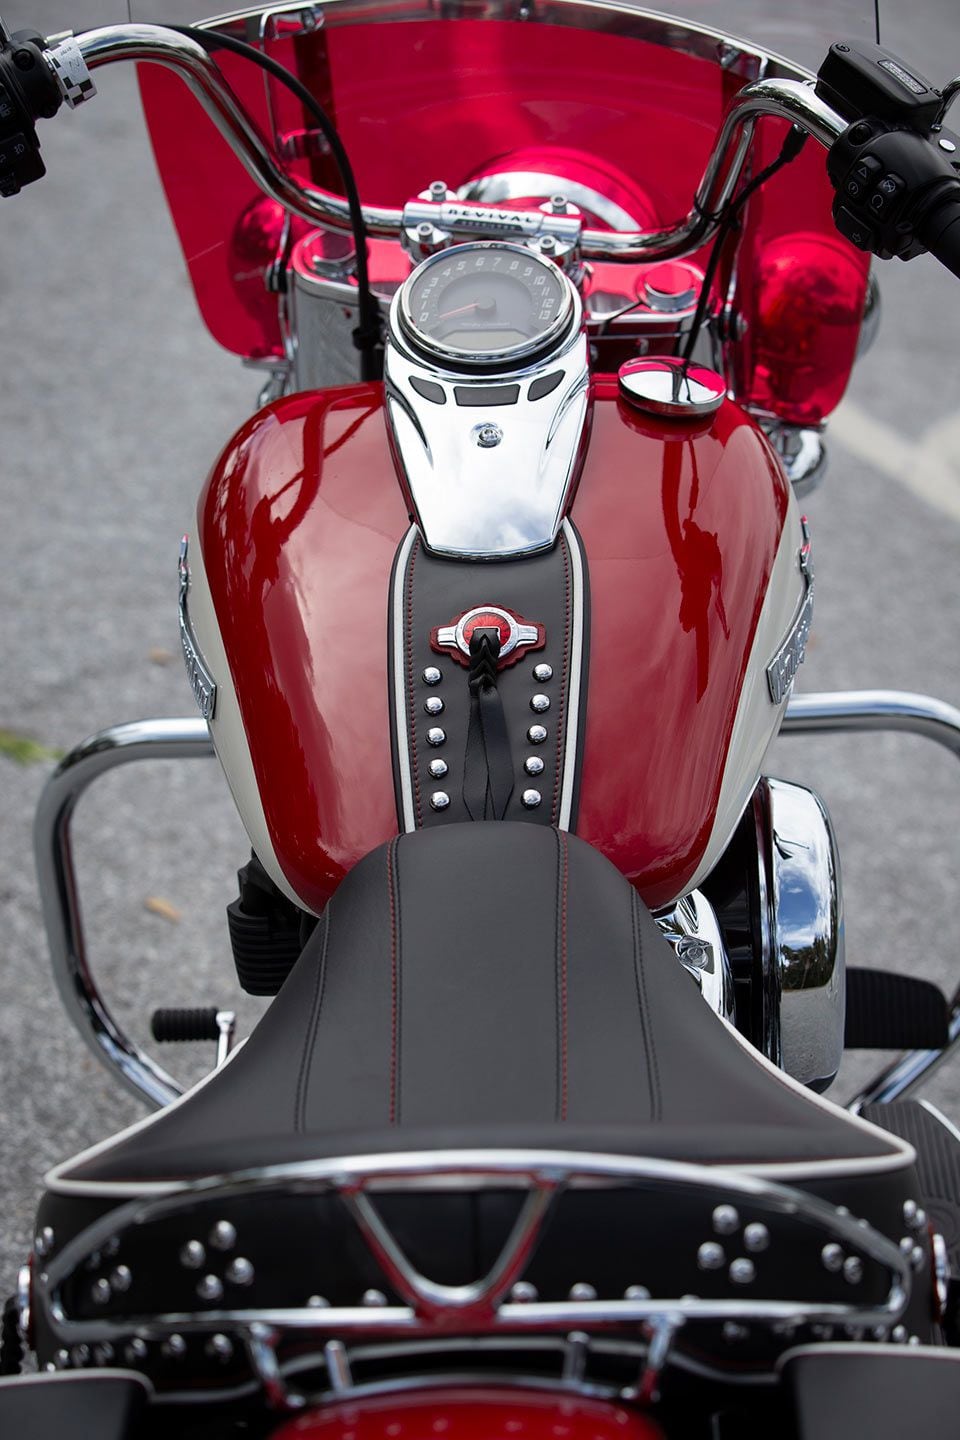 Sitting in the bike is also a trip back to the past, with a wide solo seat, leather tank strap, two-tone windshield, and analog-looking gauge taking up the view. Serialized “Hydra-Glide Revival” insert caps the handlebar riser.